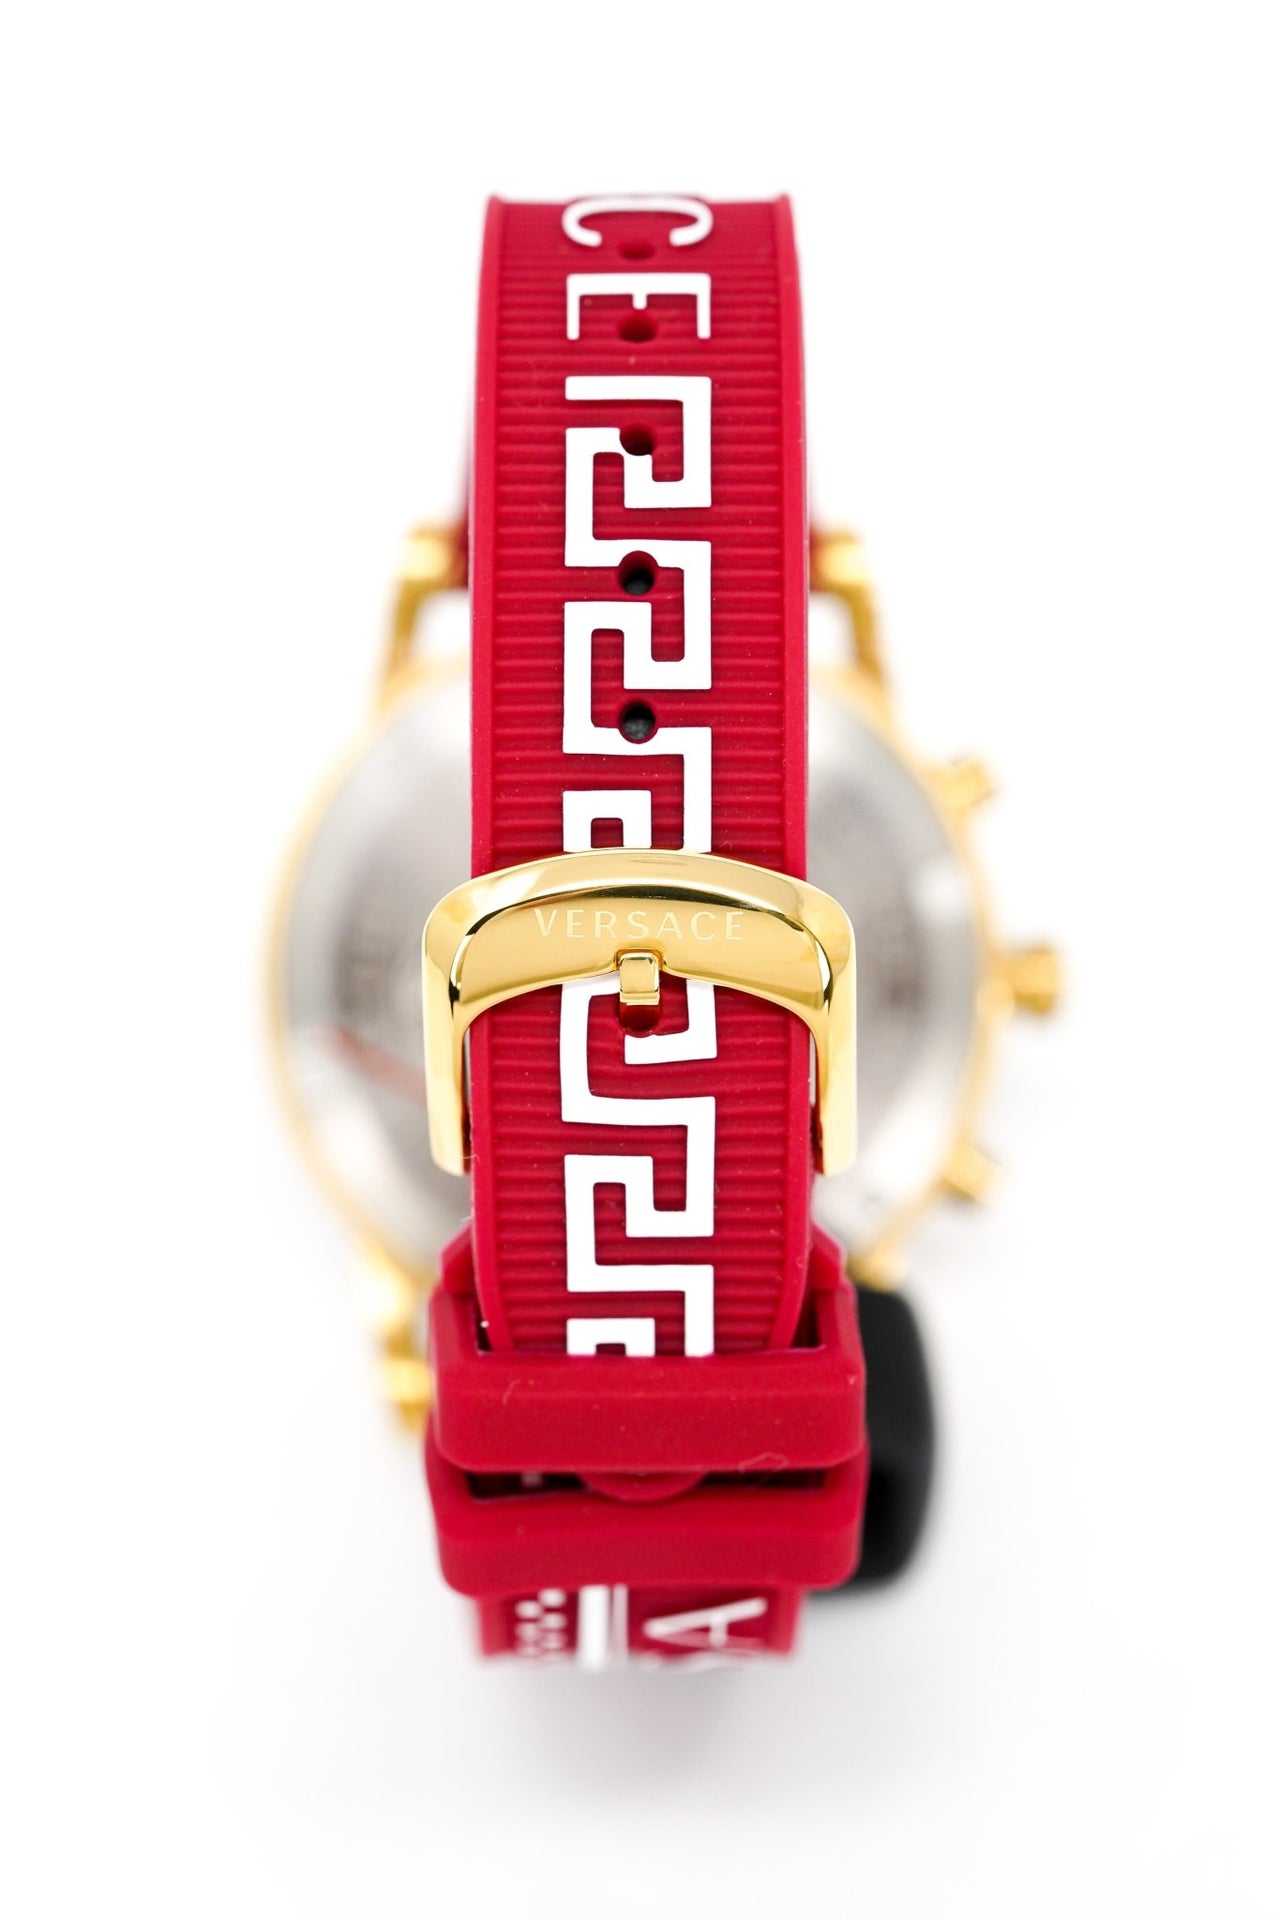 Versace Ladies Watch Sport Tech Chronograph Red Gold VEKB00322 - Watches & Crystals